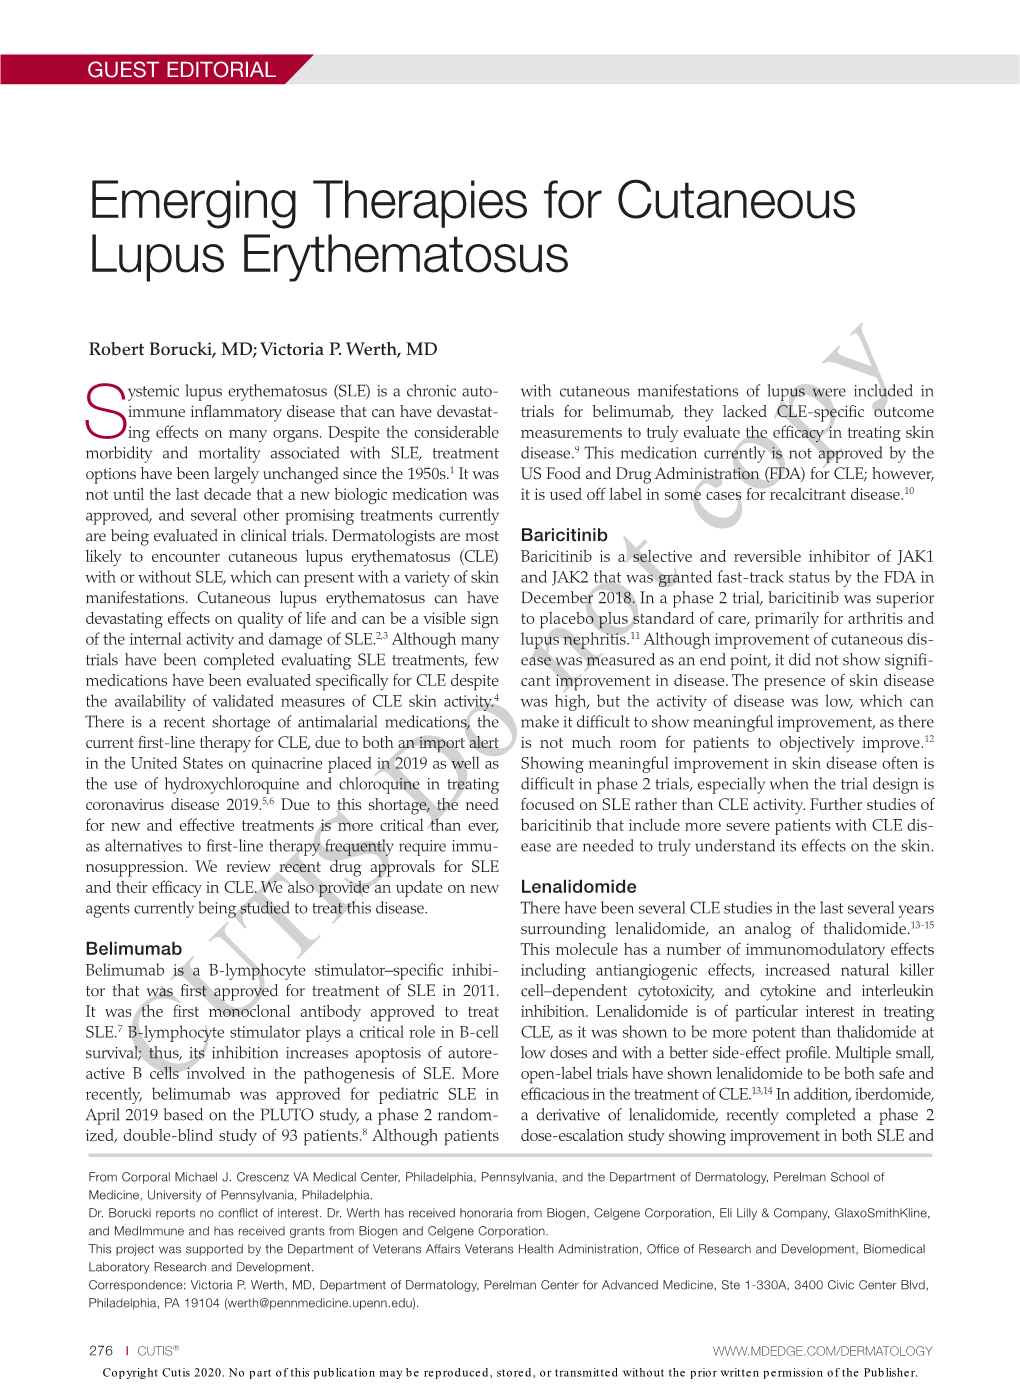 Emerging Therapies for Cutaneous Lupus Erythematosus